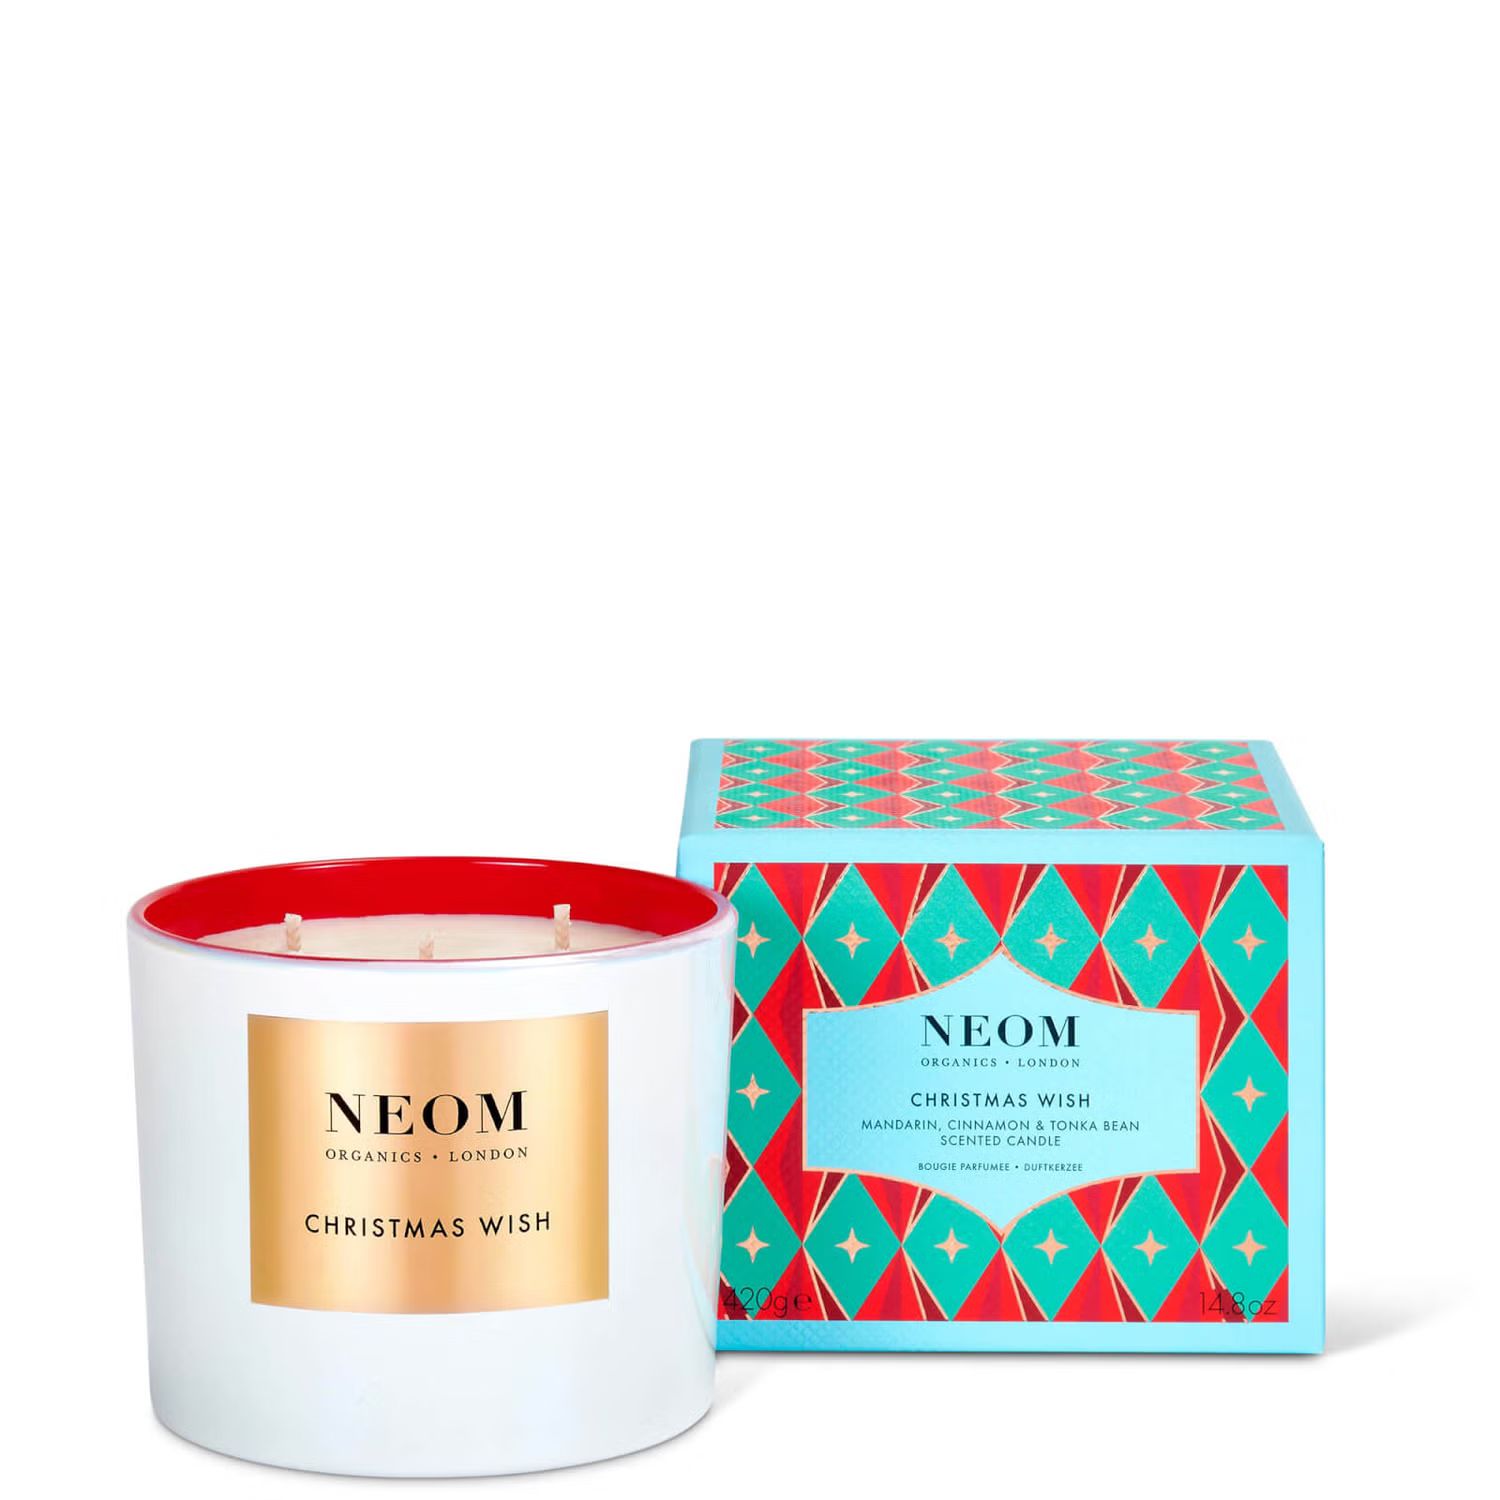 NEOM Christmas Wish 3 Wick Candle 420g | Look Fantastic (ROW)